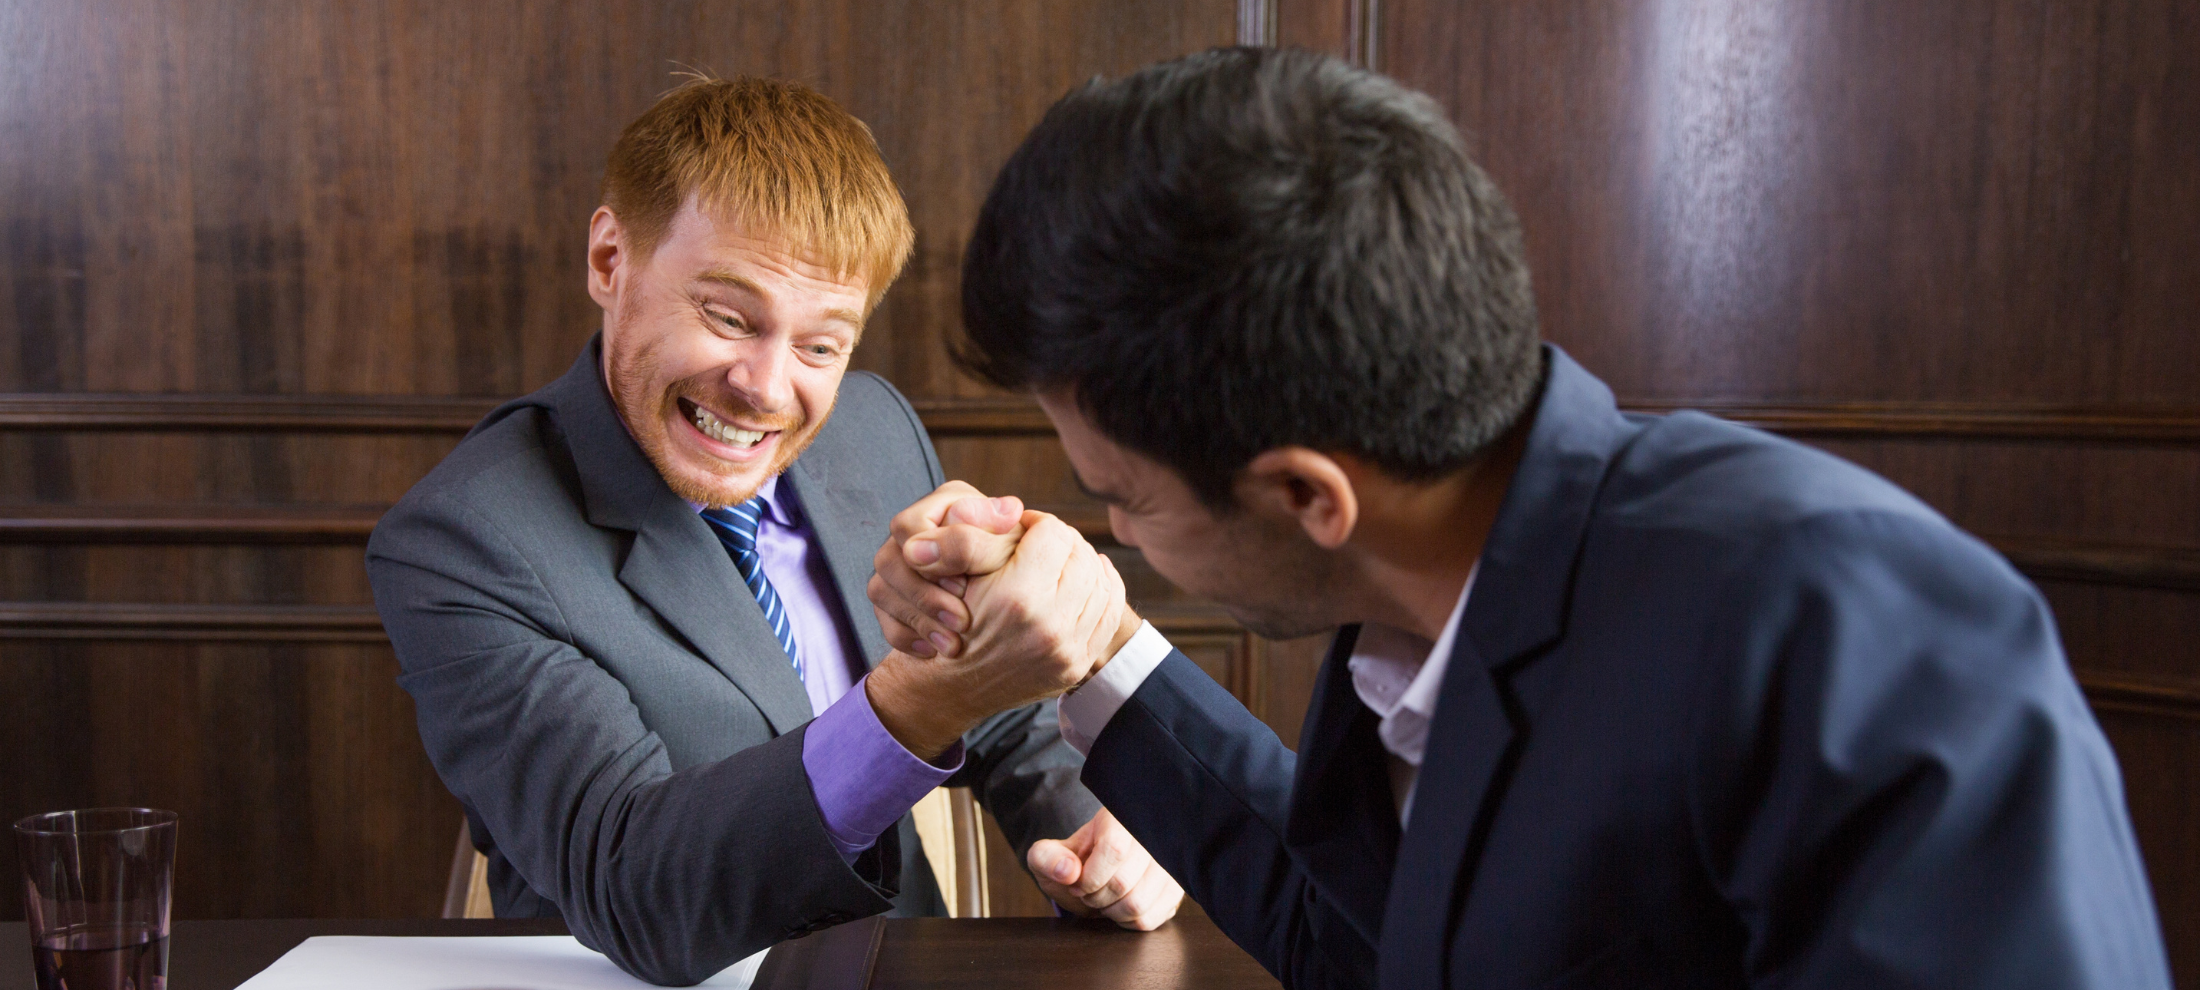 Two employees resolving conflicts in the workplace